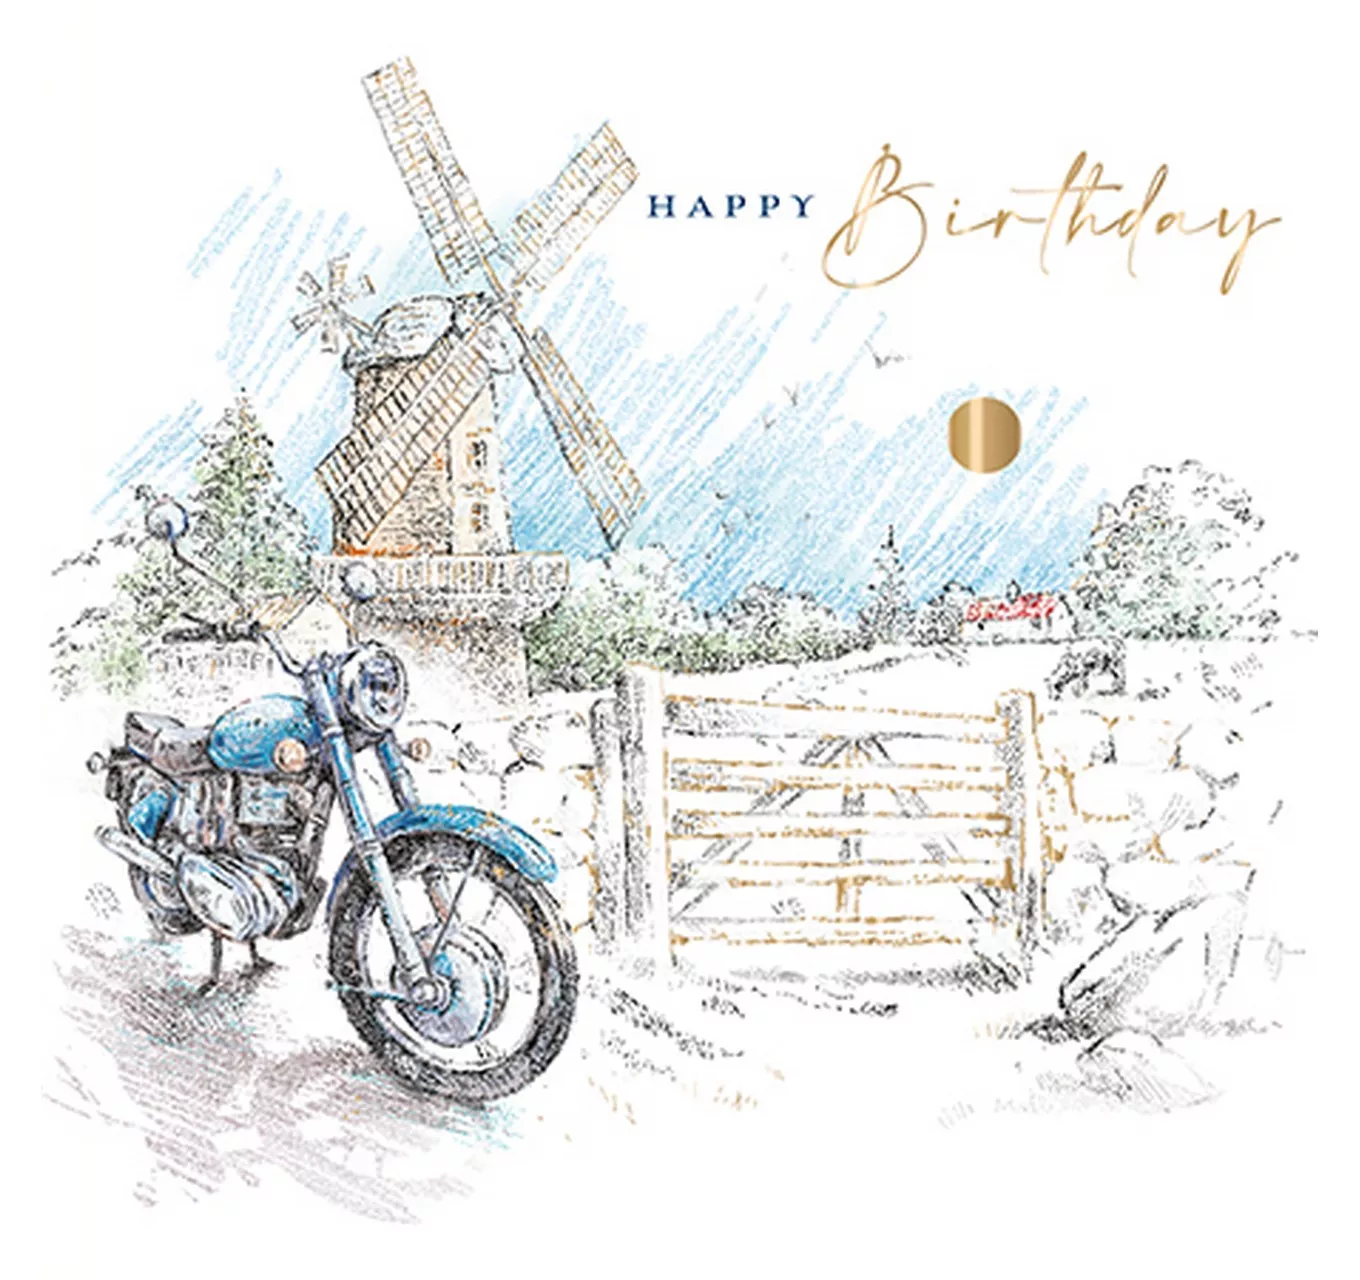 Birthday Card - A Ride To The Country